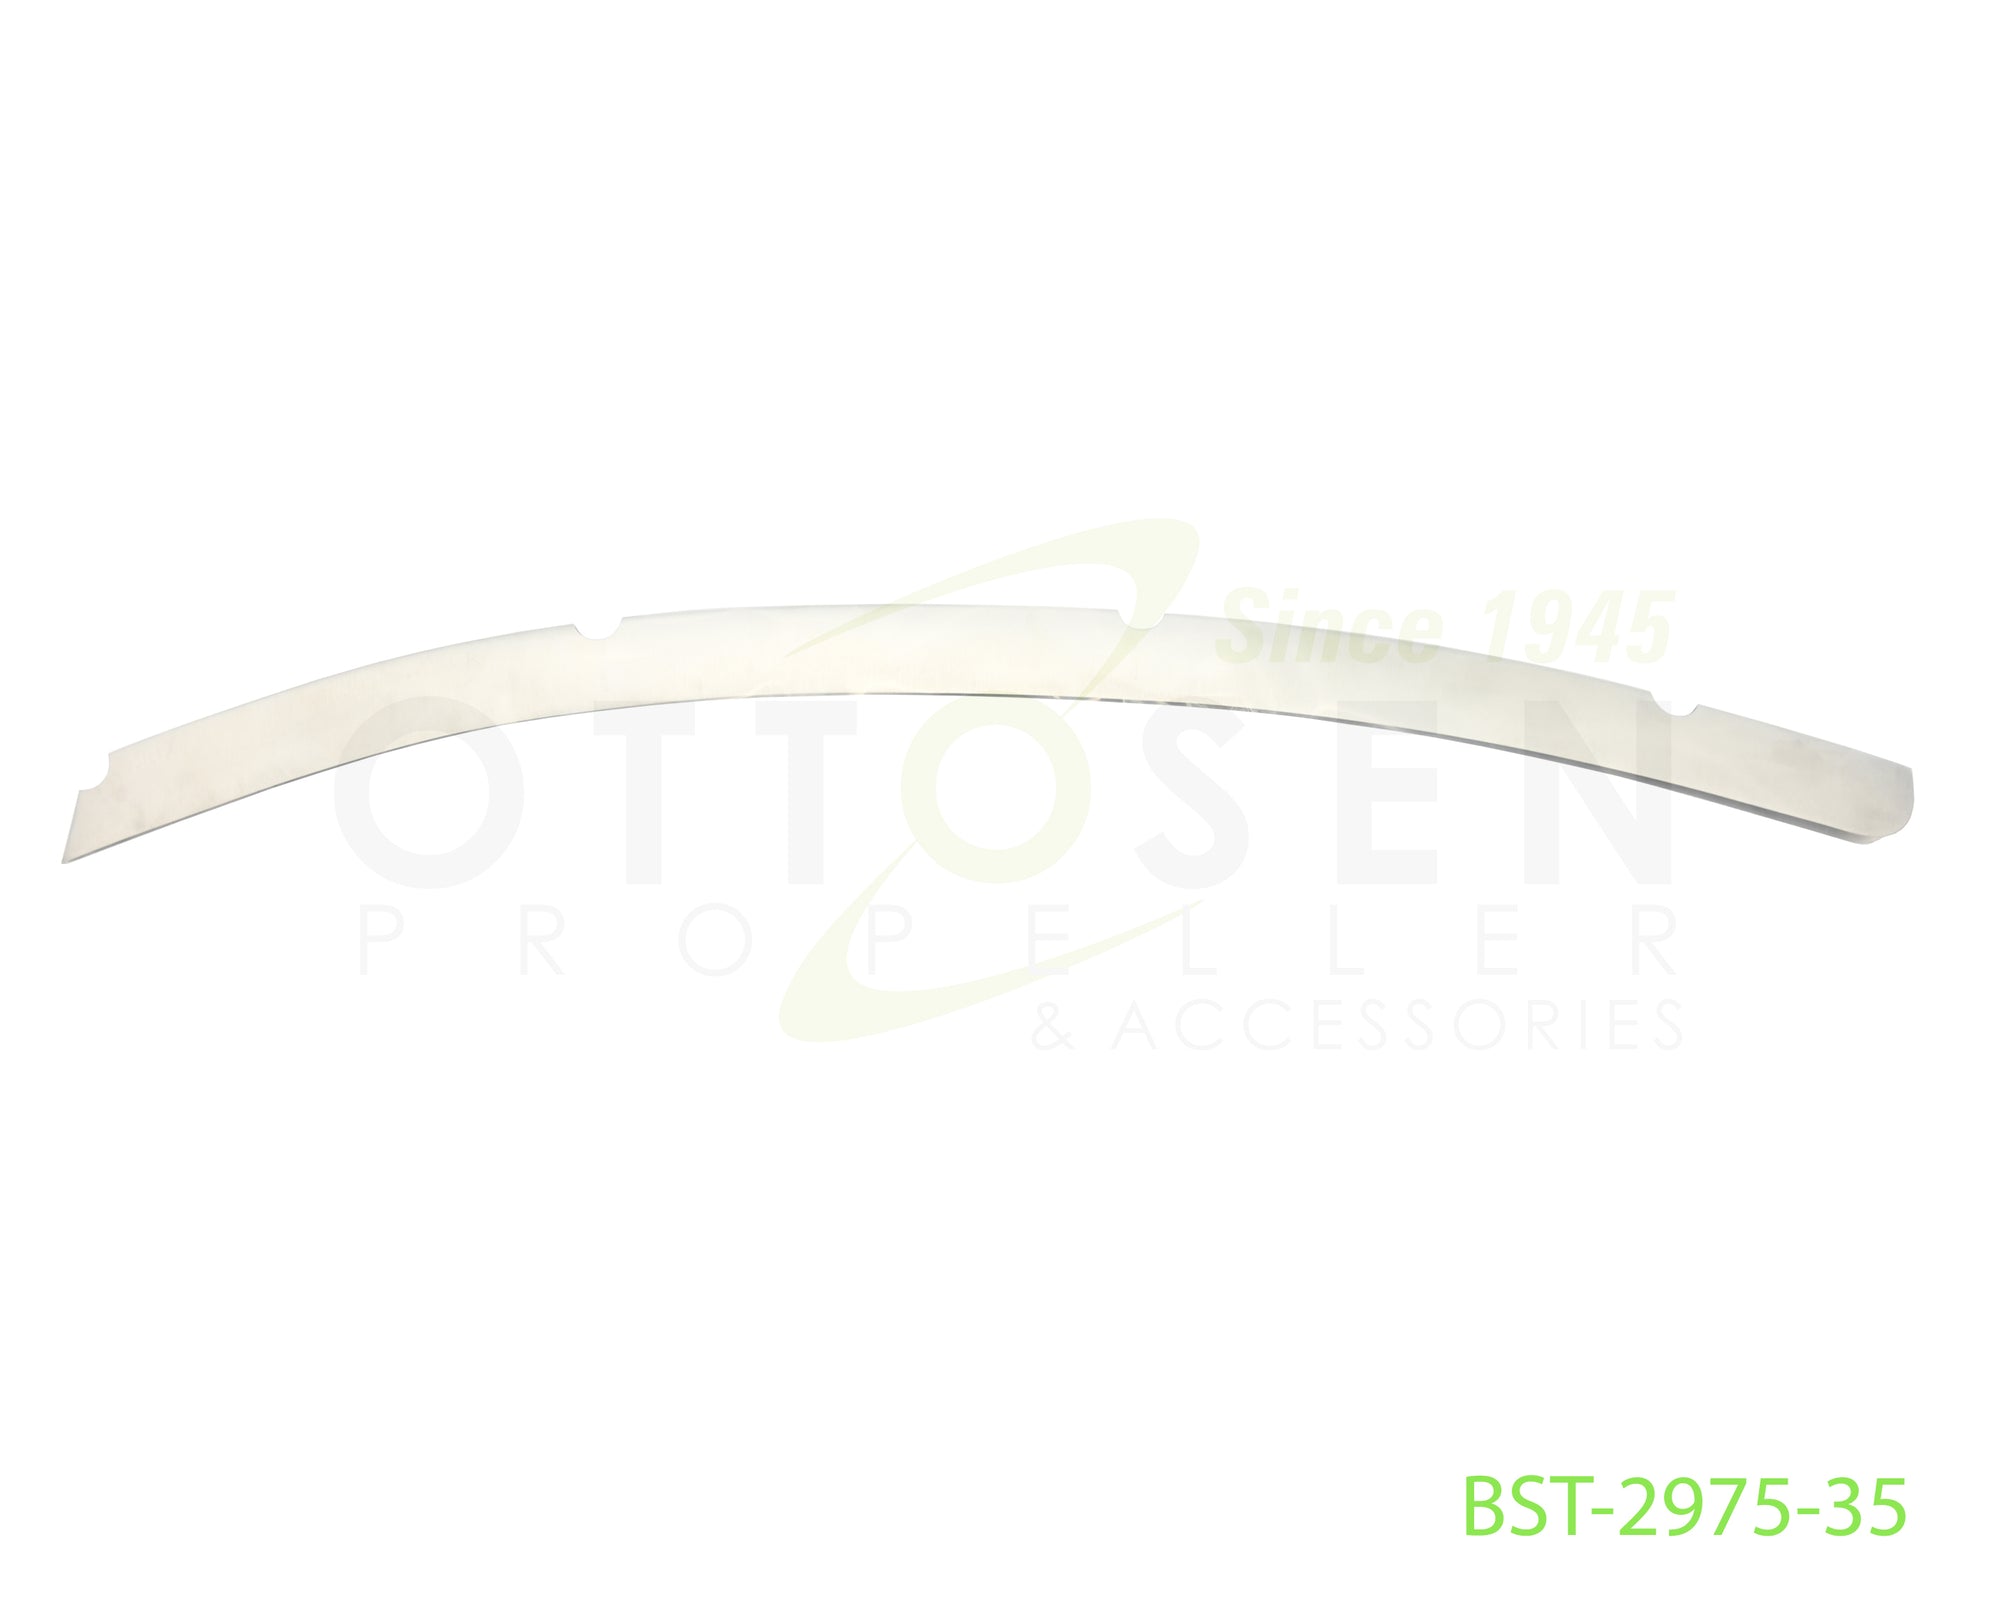 BST-2975-35-HARTZELLPROPELLER-78D01-FIT-CHECK-TOOL-PICTURE-1